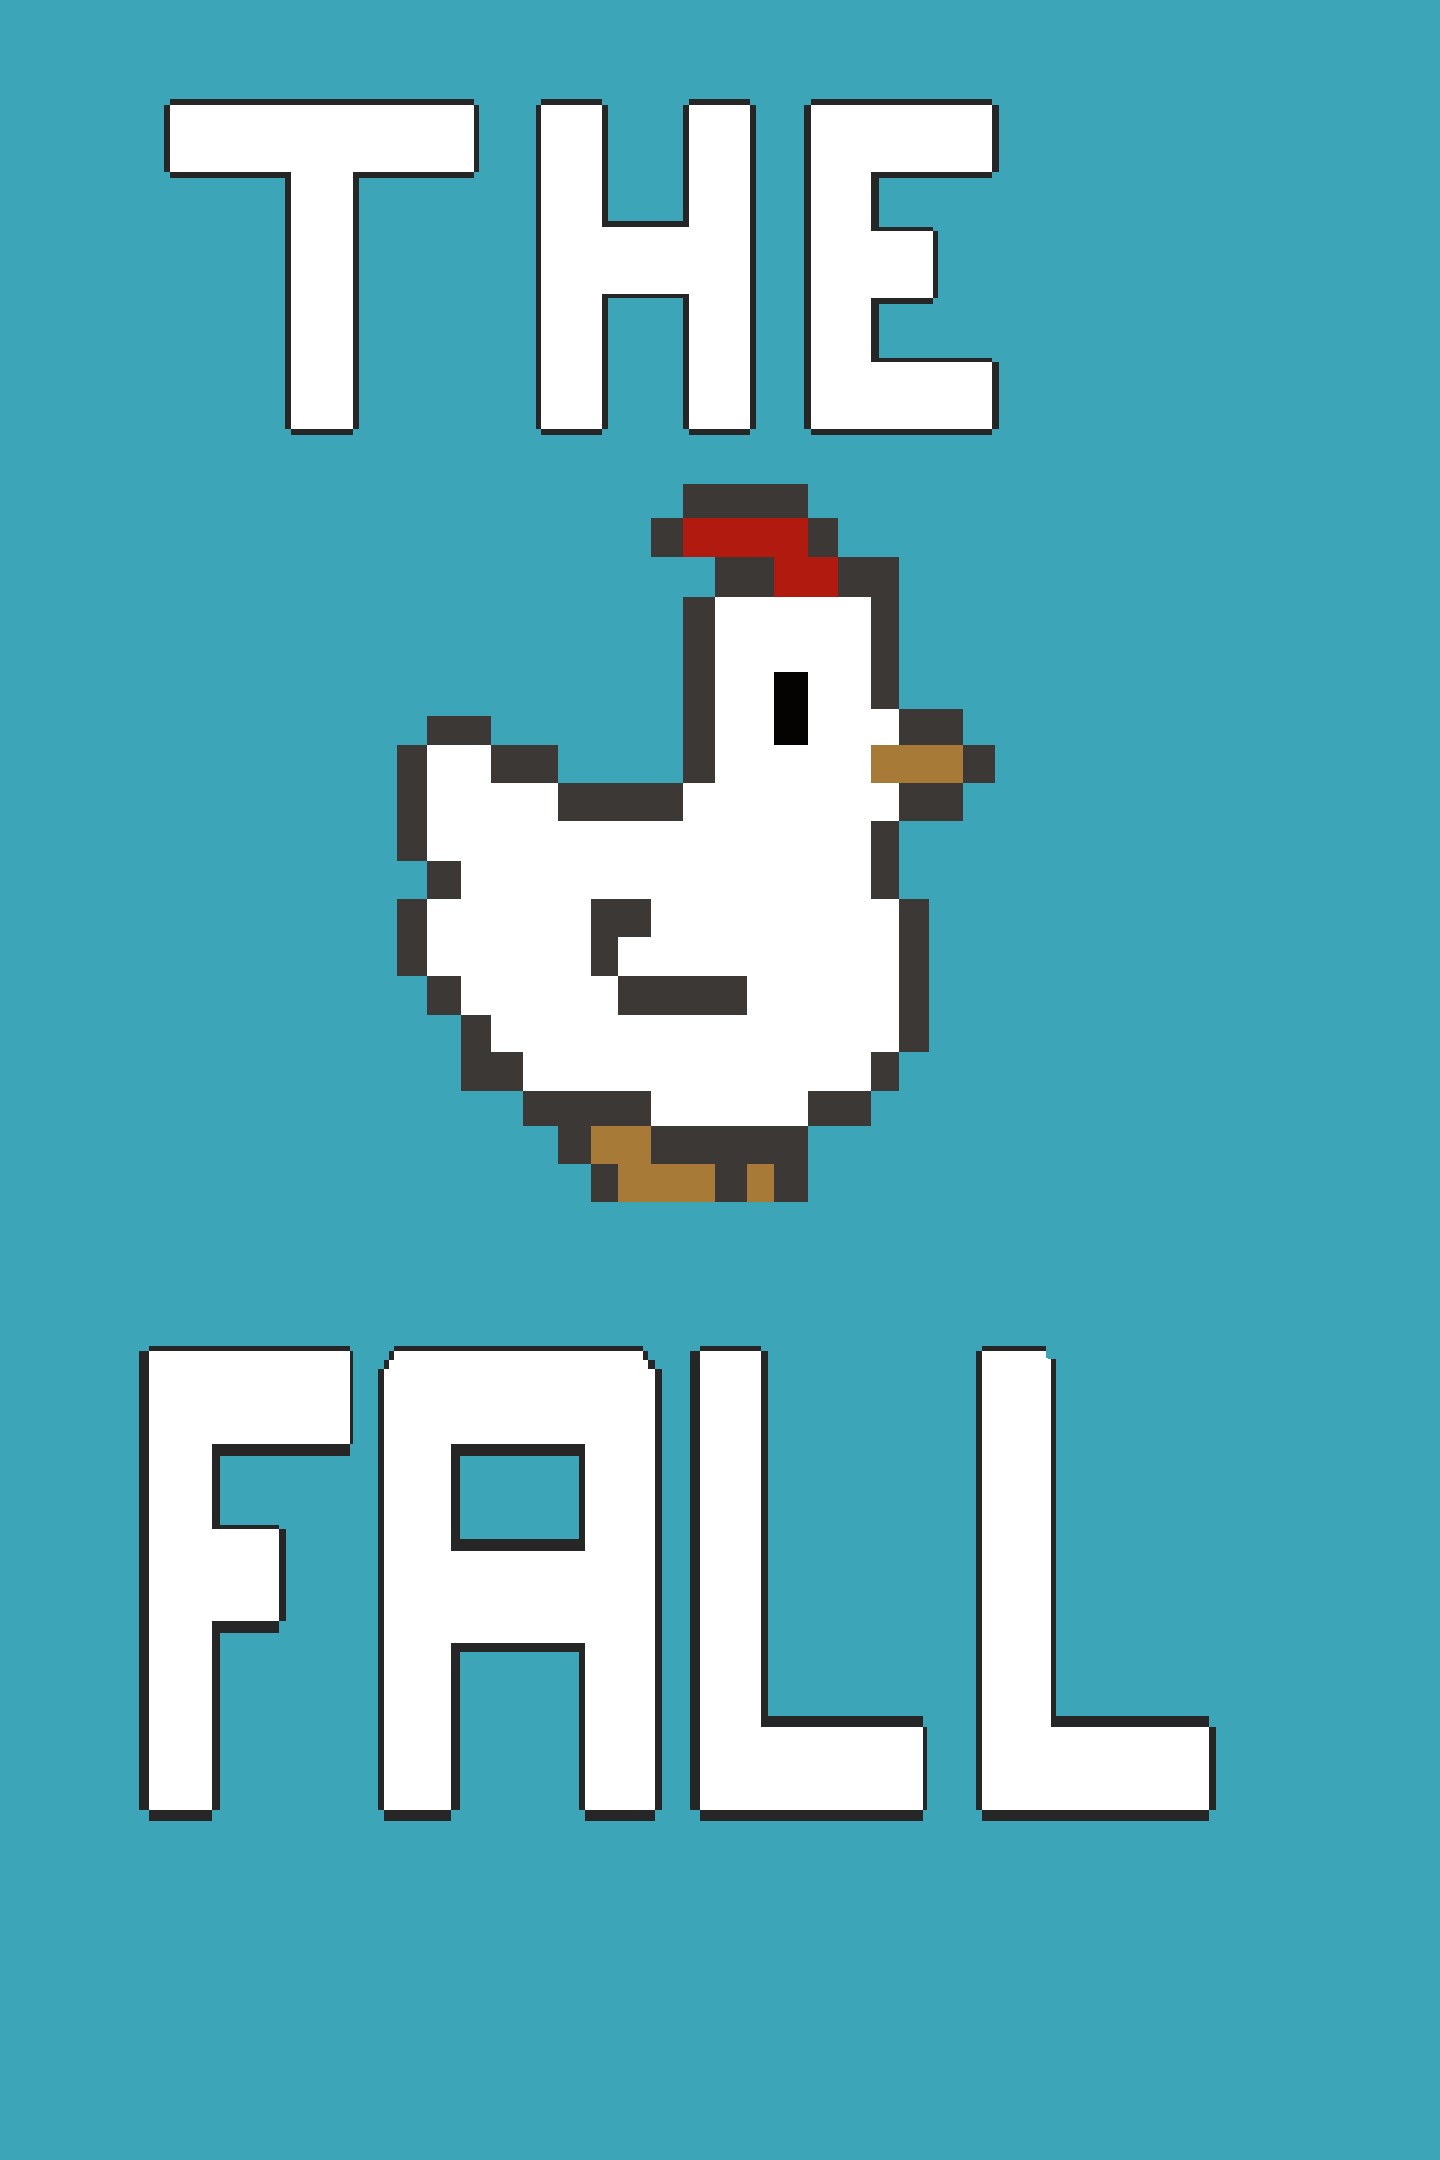 The Chicken's Fall